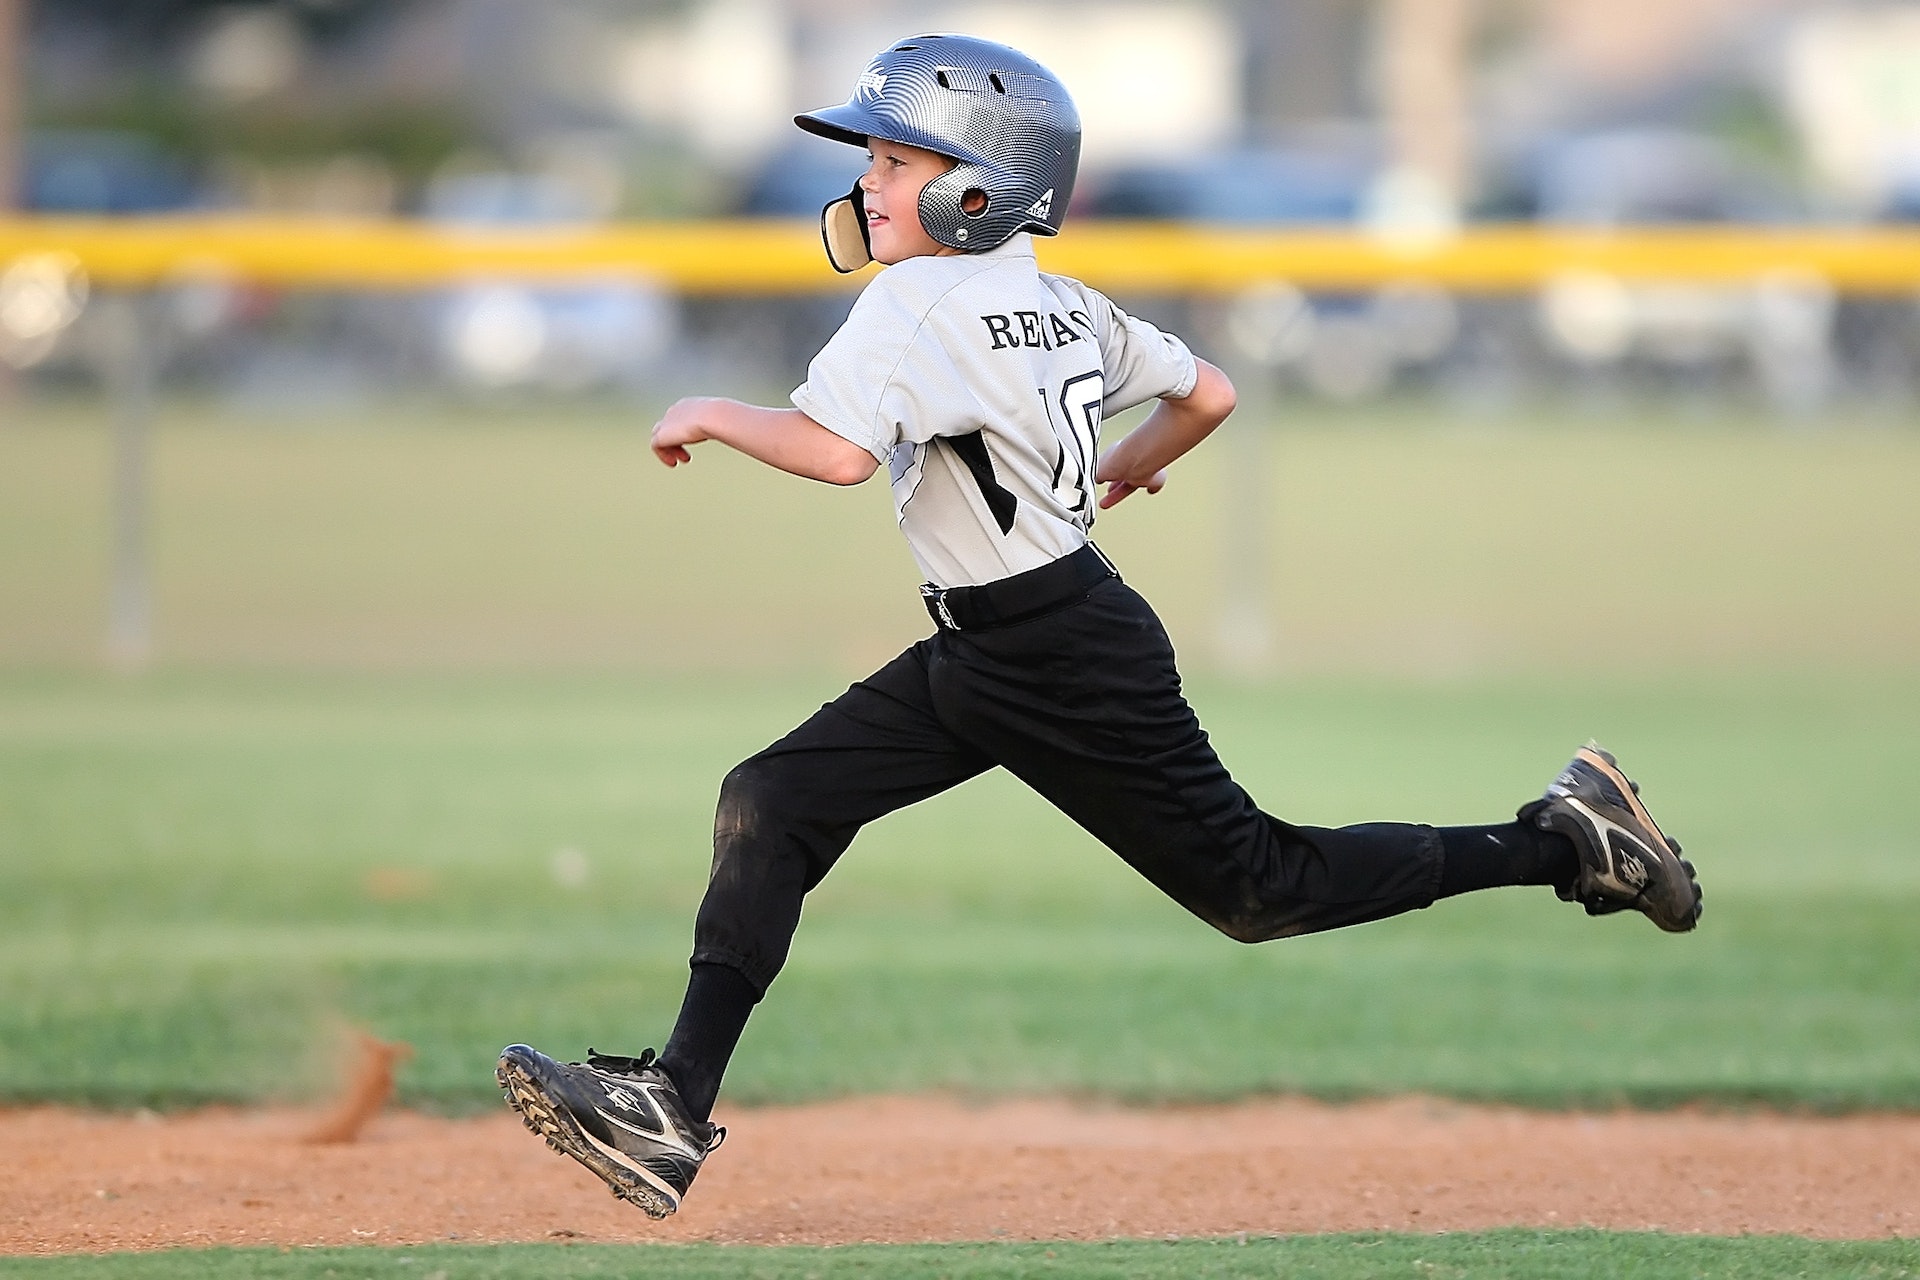 Why Are Extracurricular Activities Important For Kids?